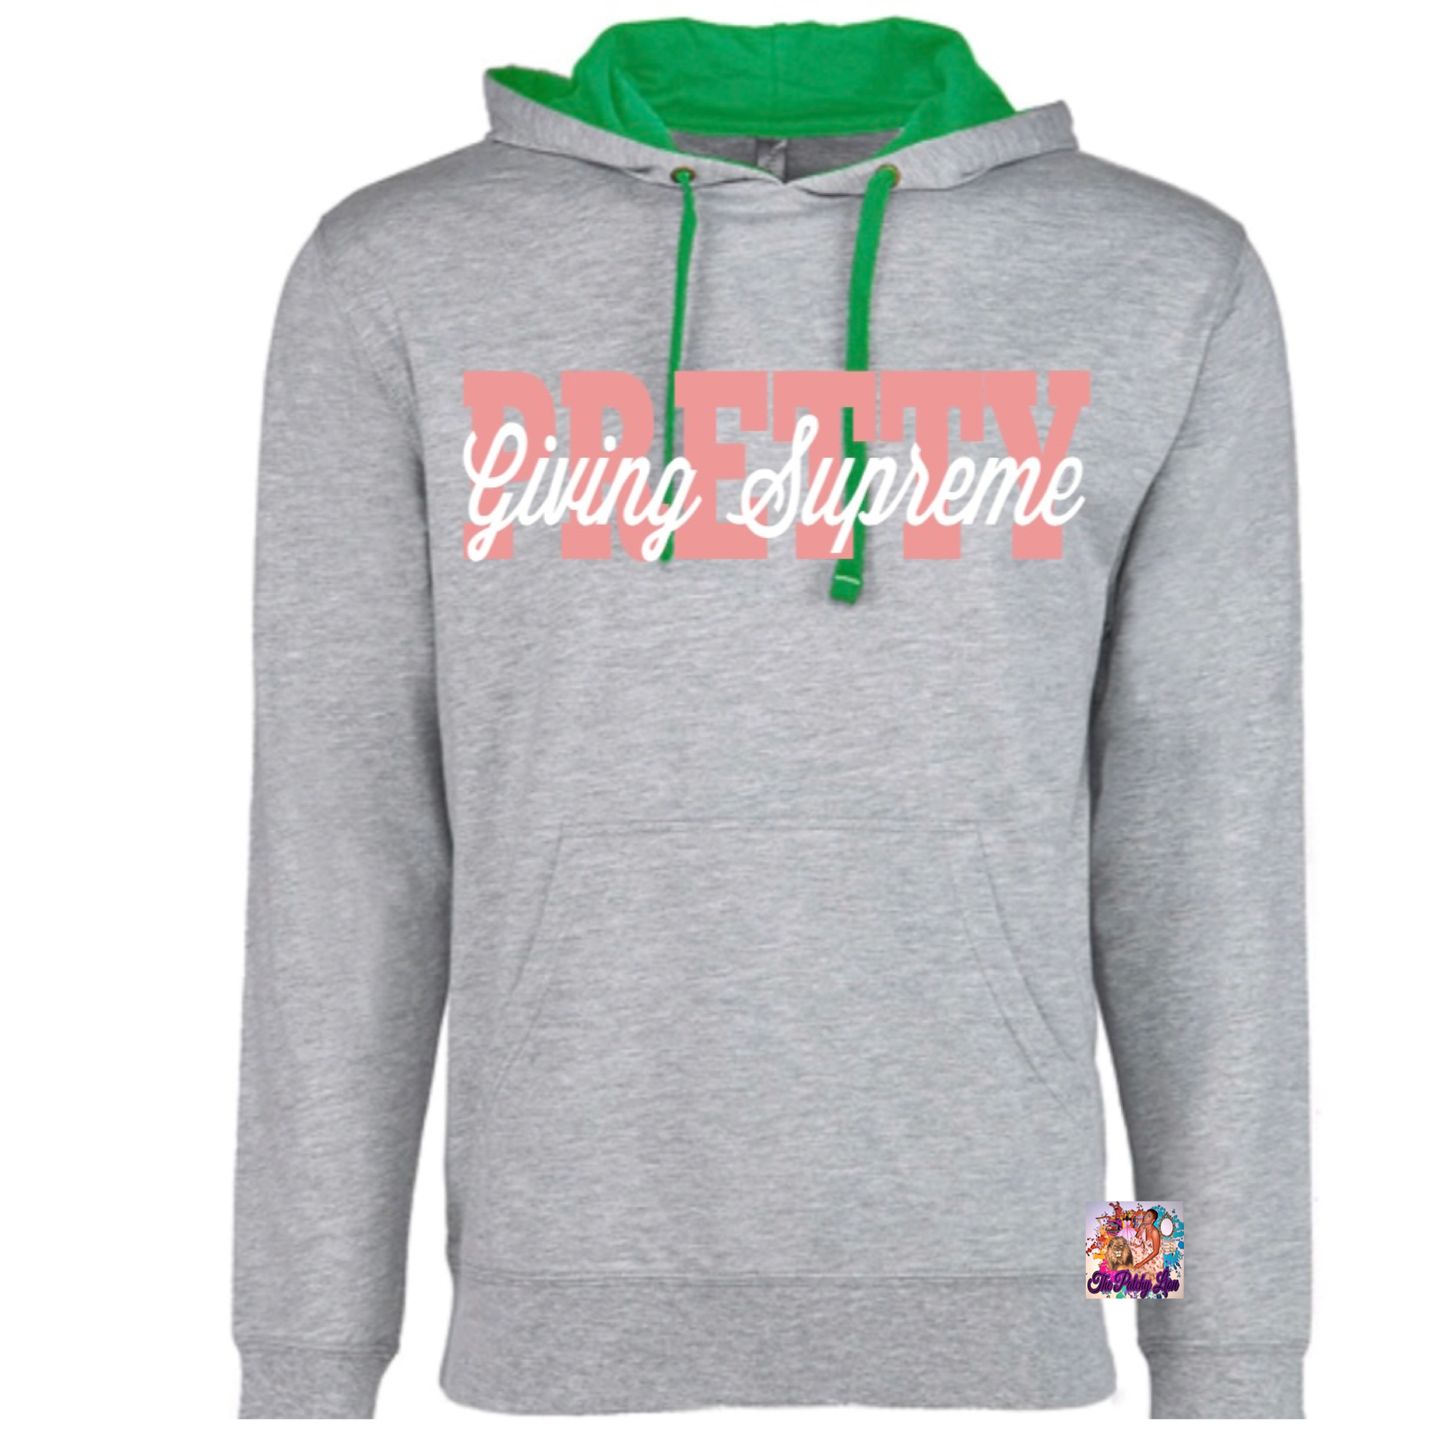 Giving Supreme Hoodie | Free Shipping